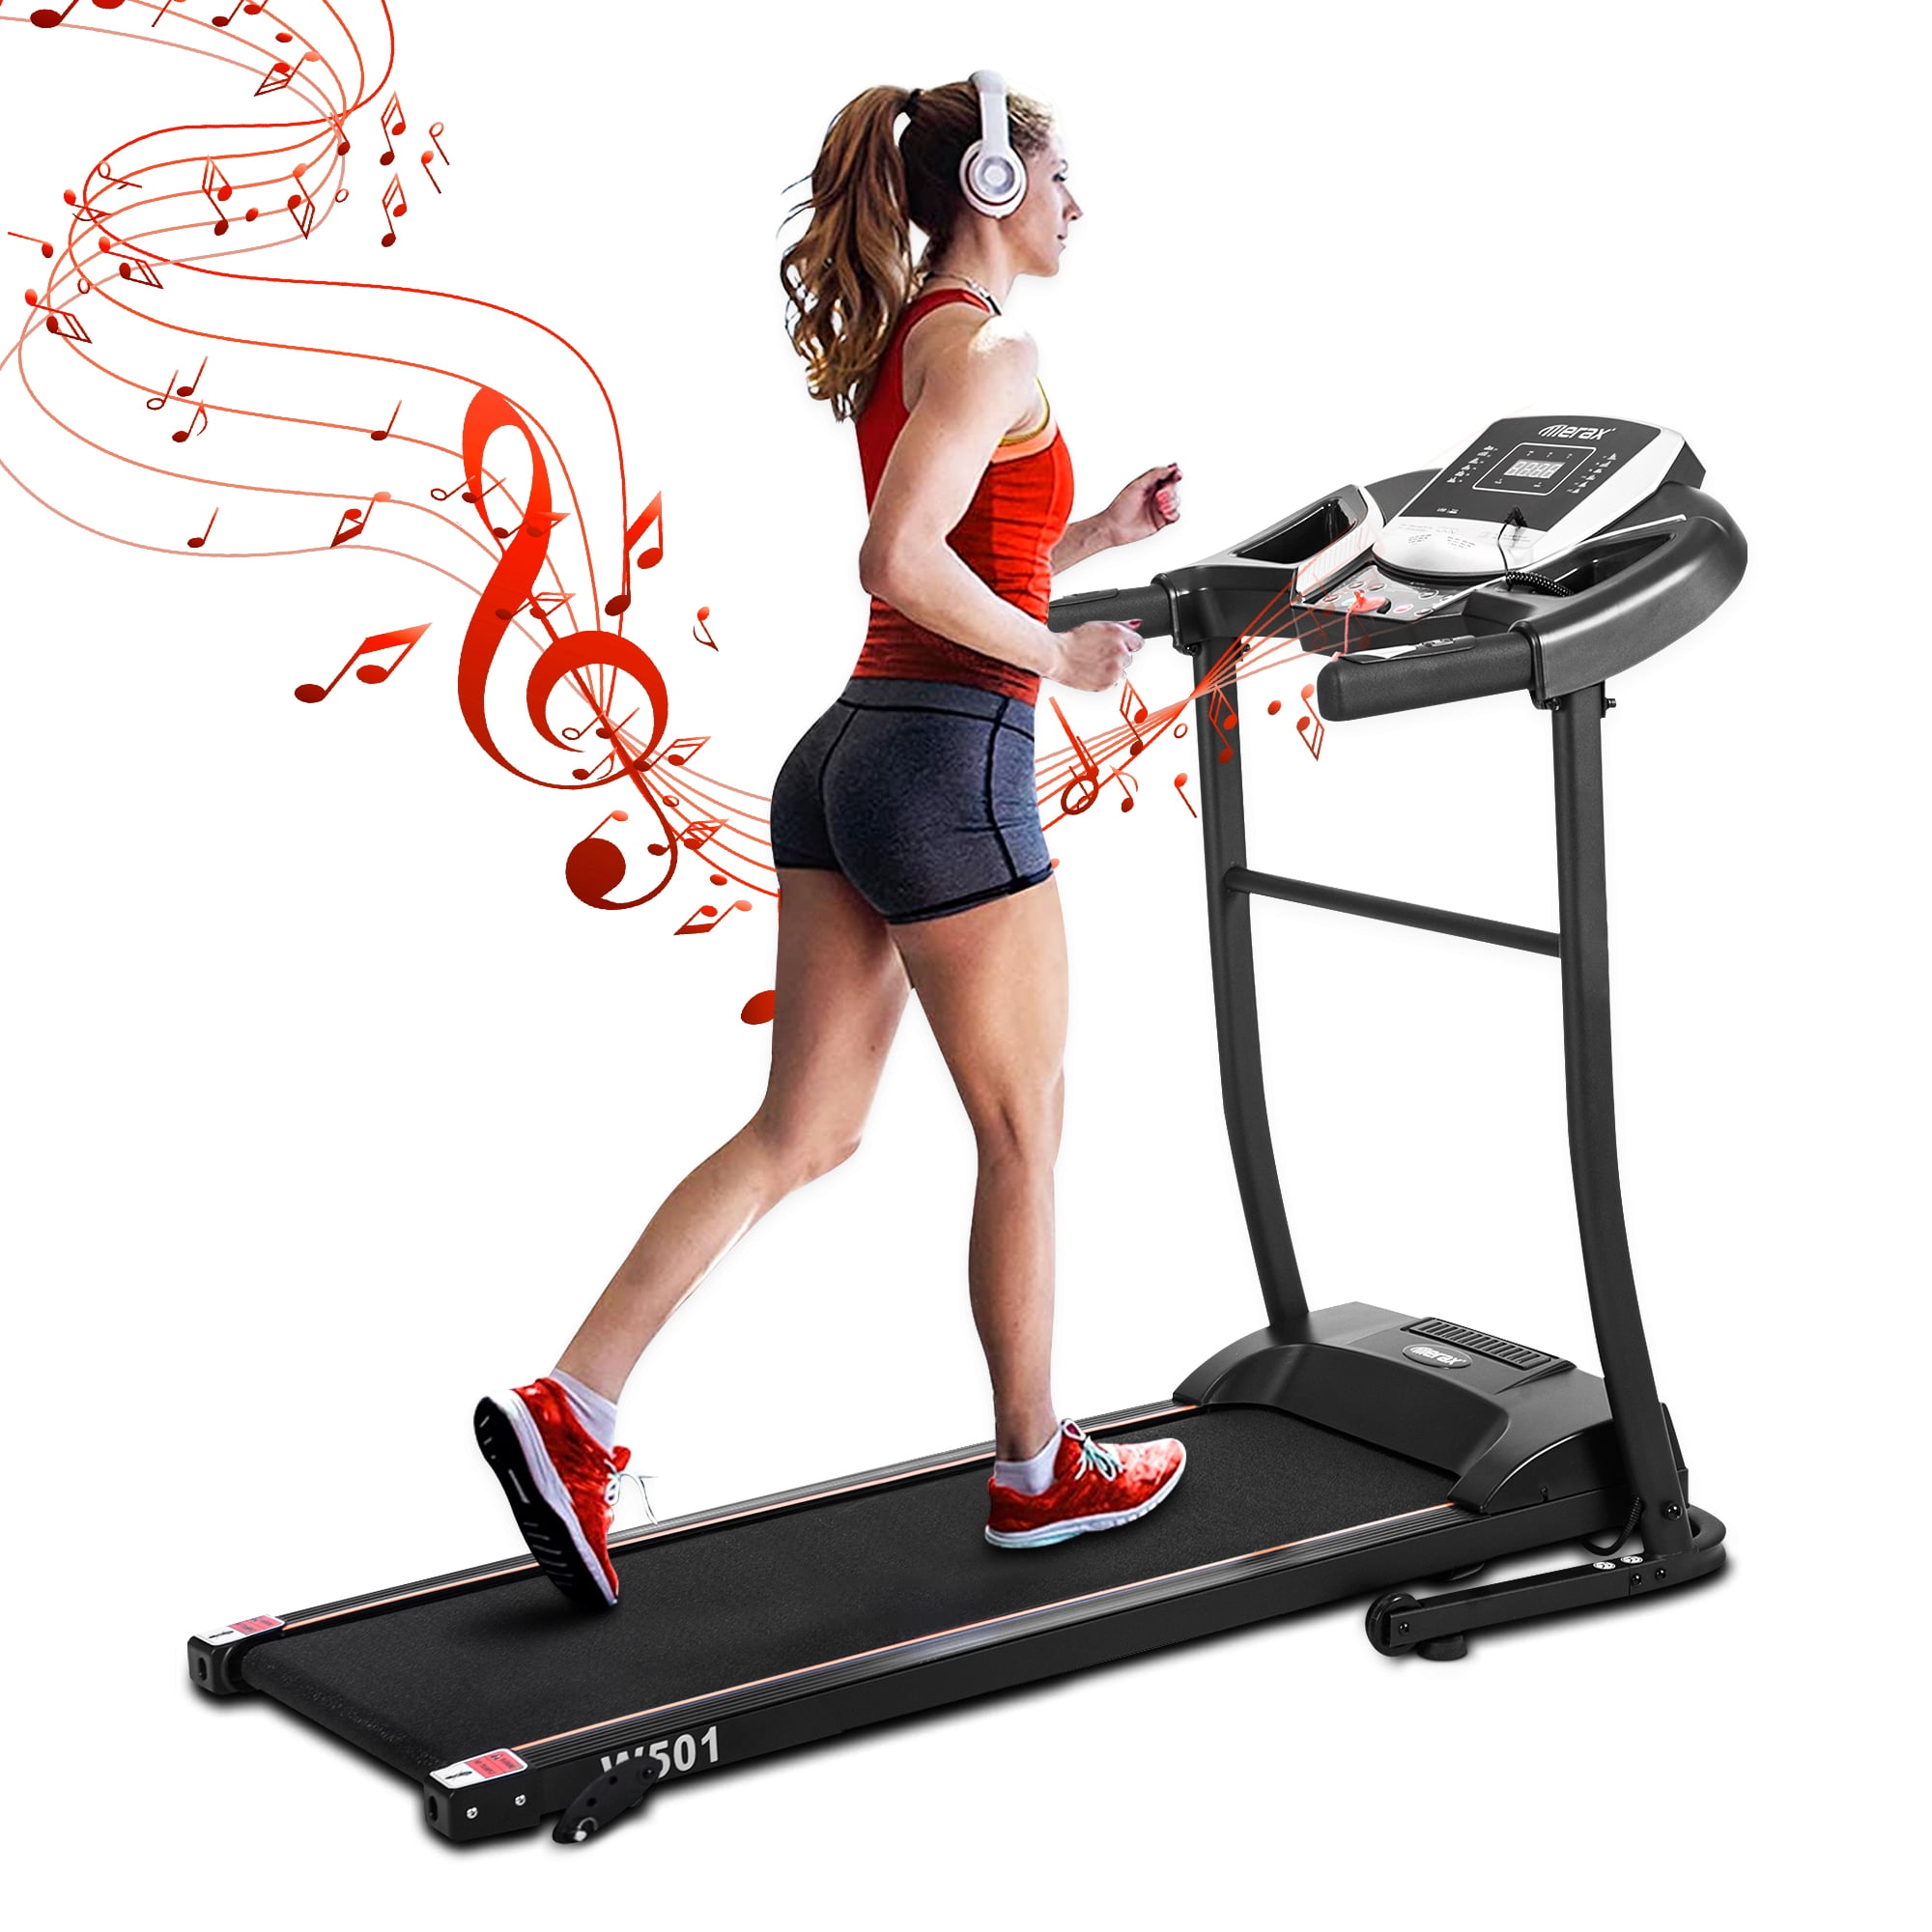 Segmart Electric Exercise Treadmills on Sale, 55 In. x 23.6 In. x 43.3 In. Smart Folding Treadmill with MP3 Audio Auxiliary Port, 12 Preset Program, Motorized Running Exercise Equipment for Home, S10268